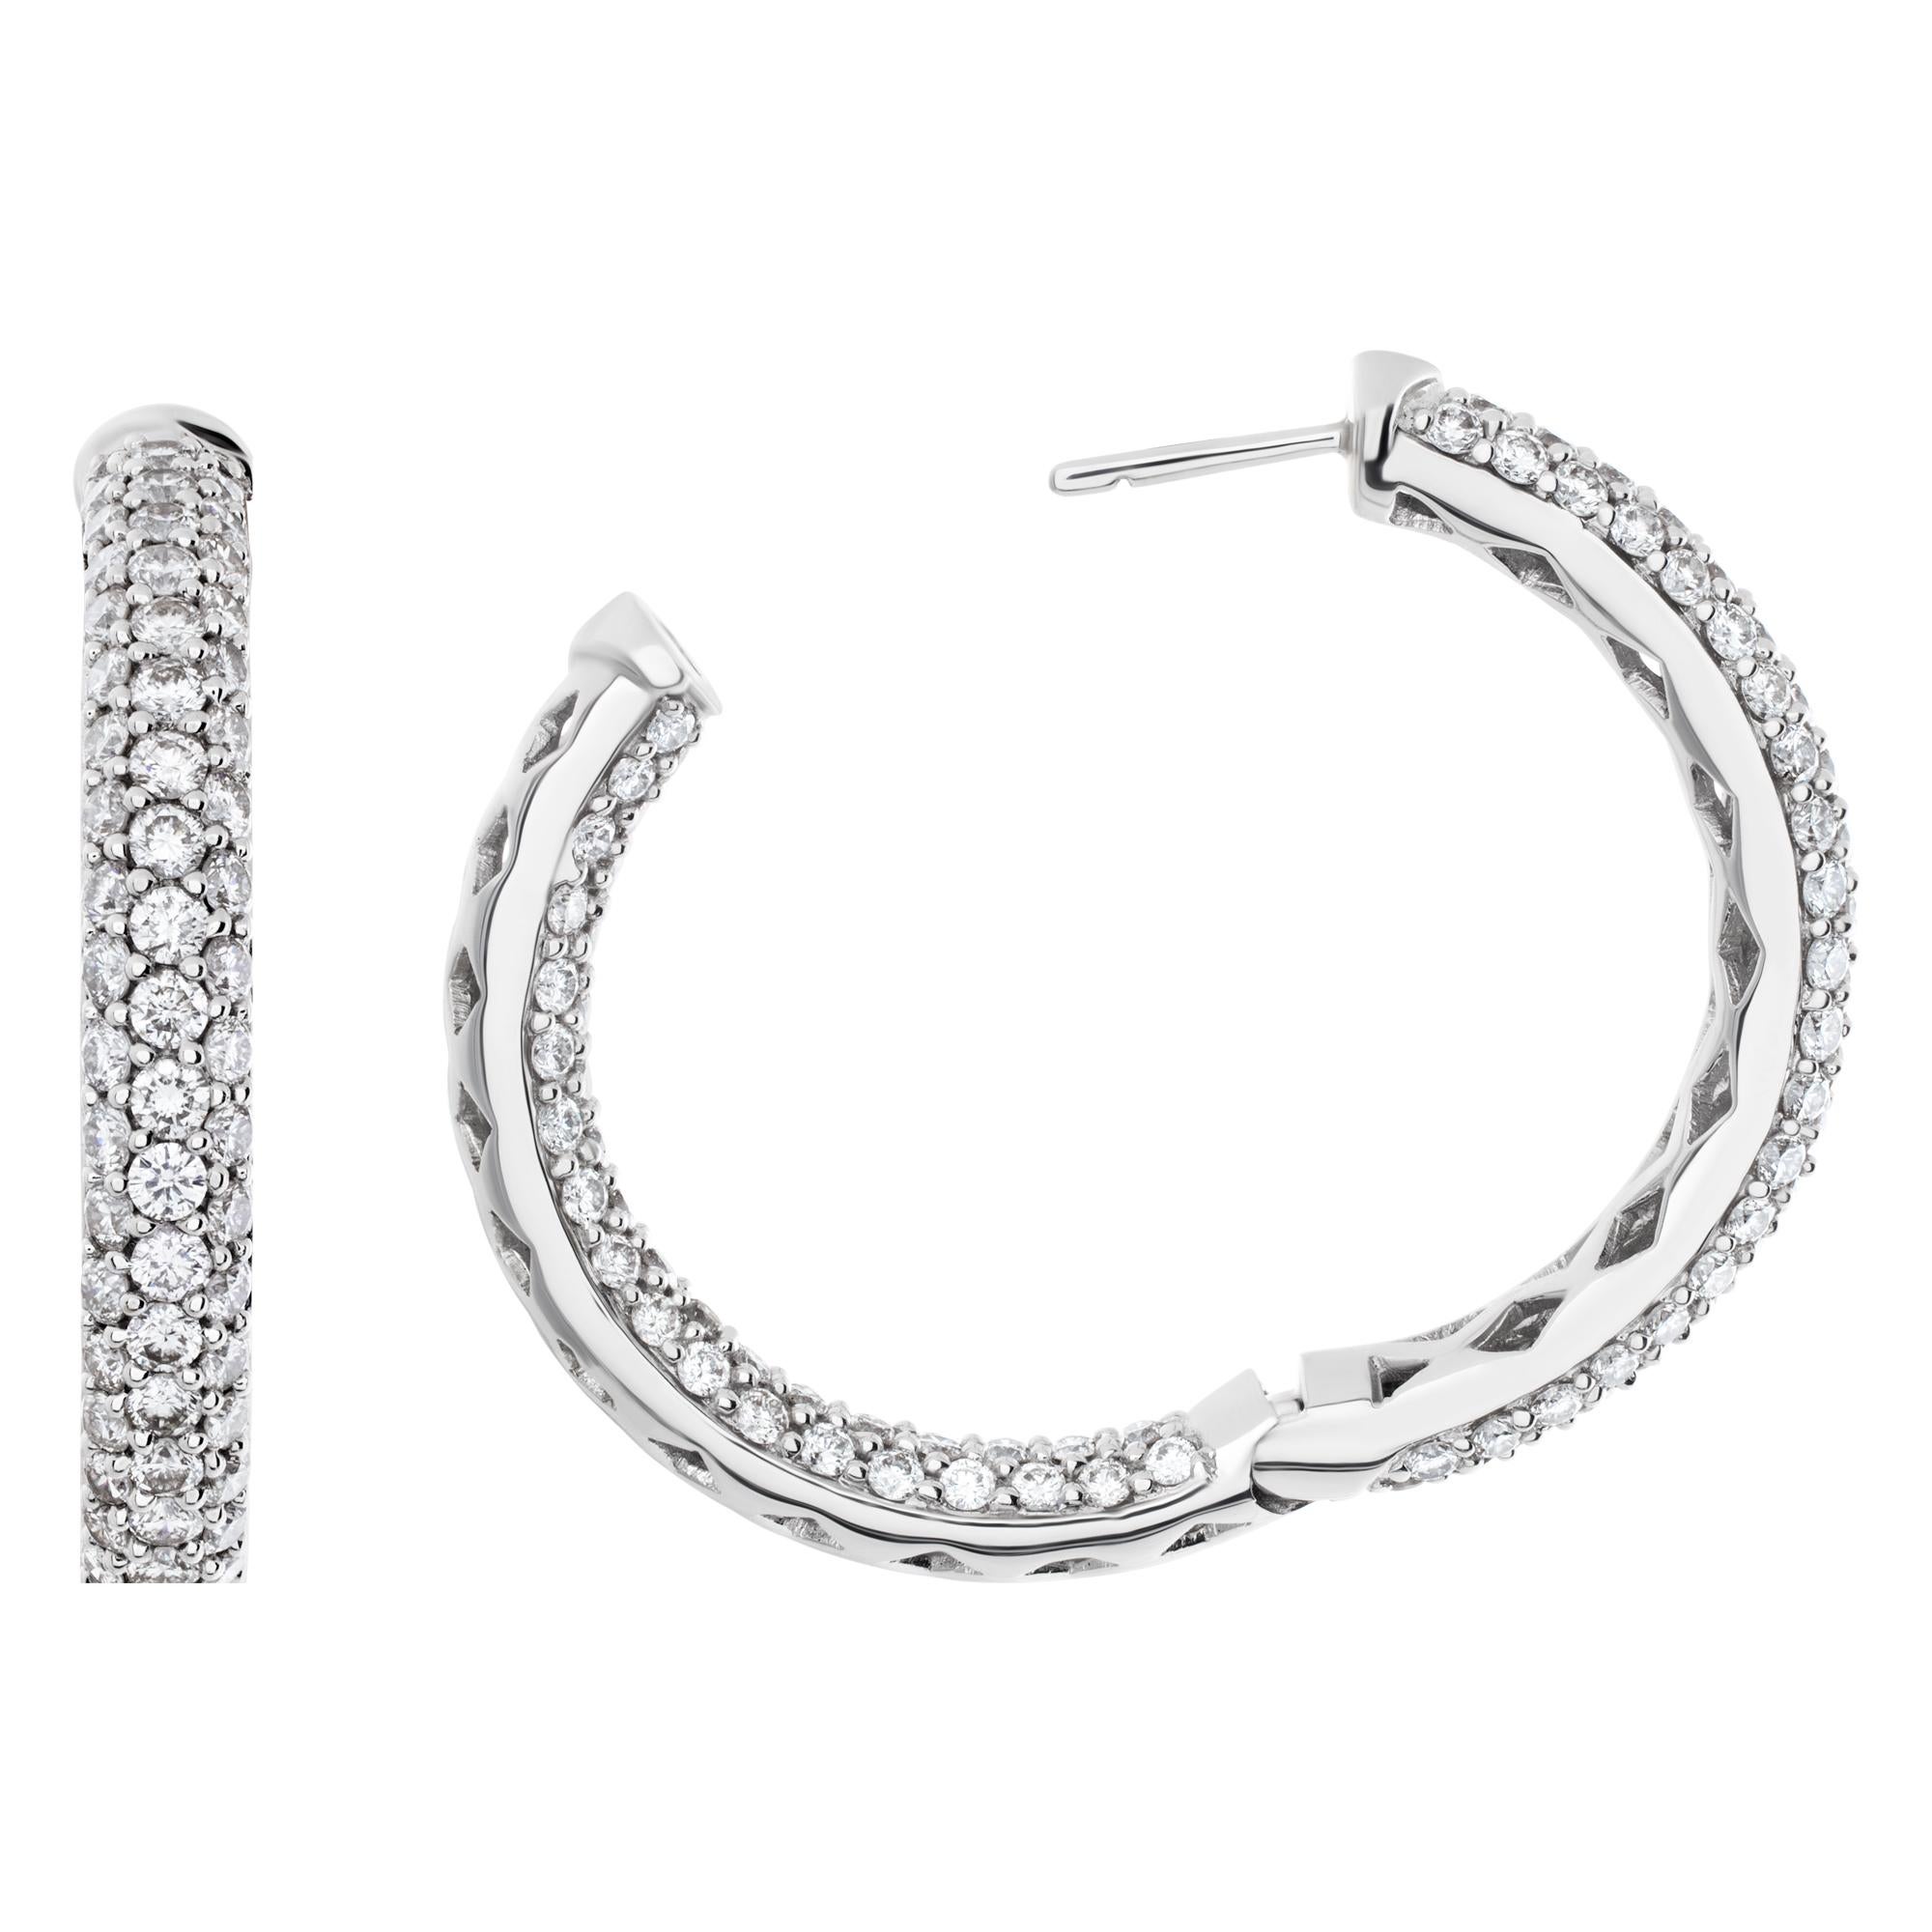 Diamond hoop earrings in 18k white gold In Excellent Condition For Sale In Surfside, FL